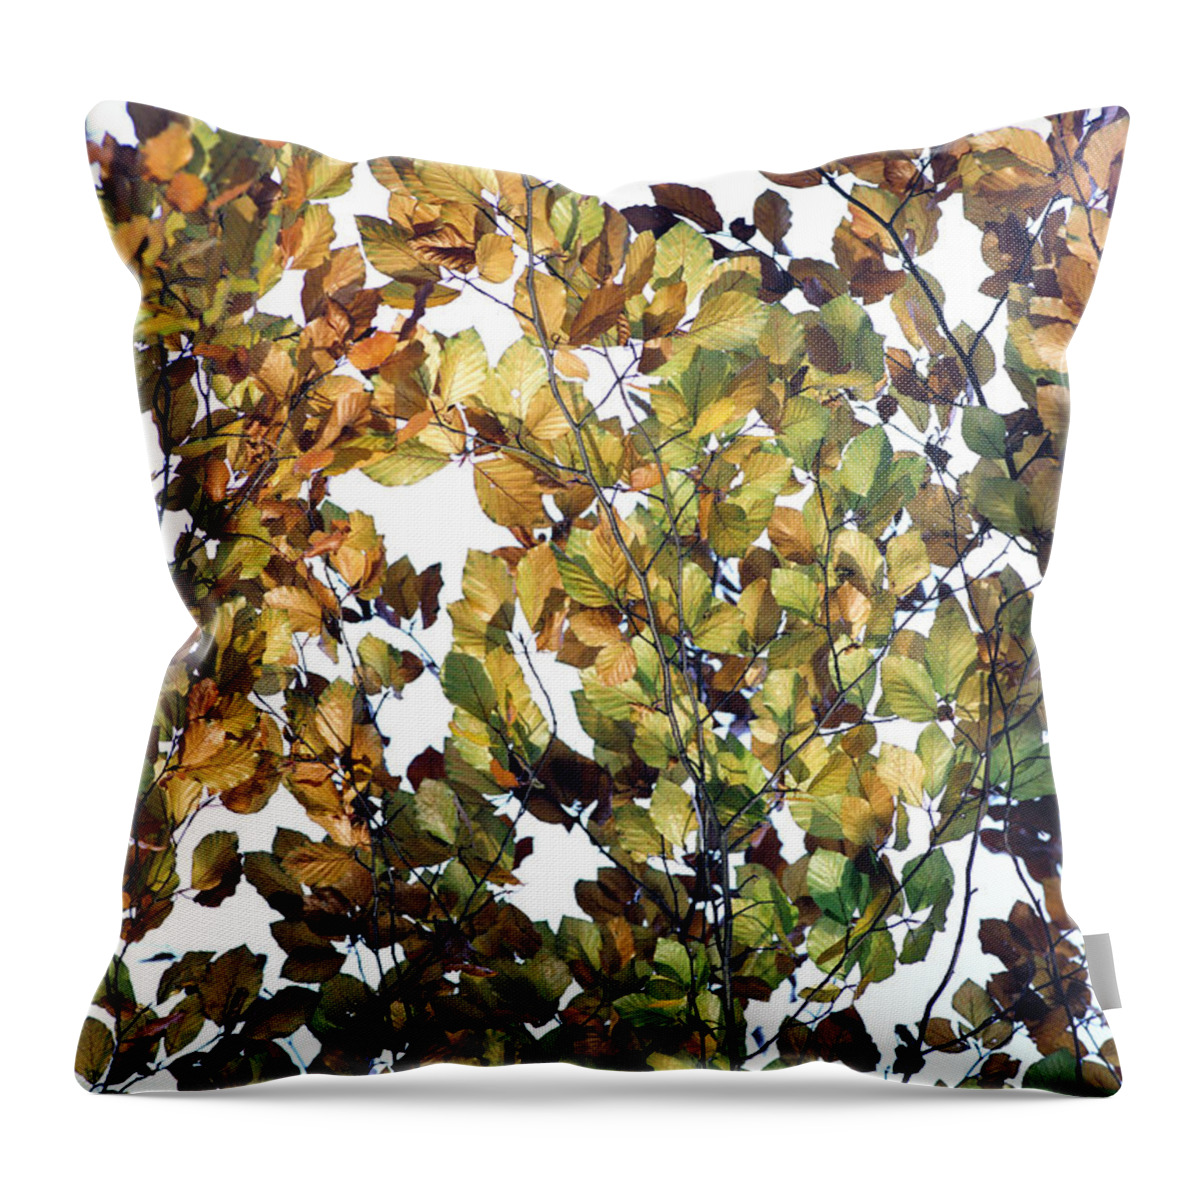 Autumn Throw Pillow featuring the photograph The Fall by Rebecca Harman